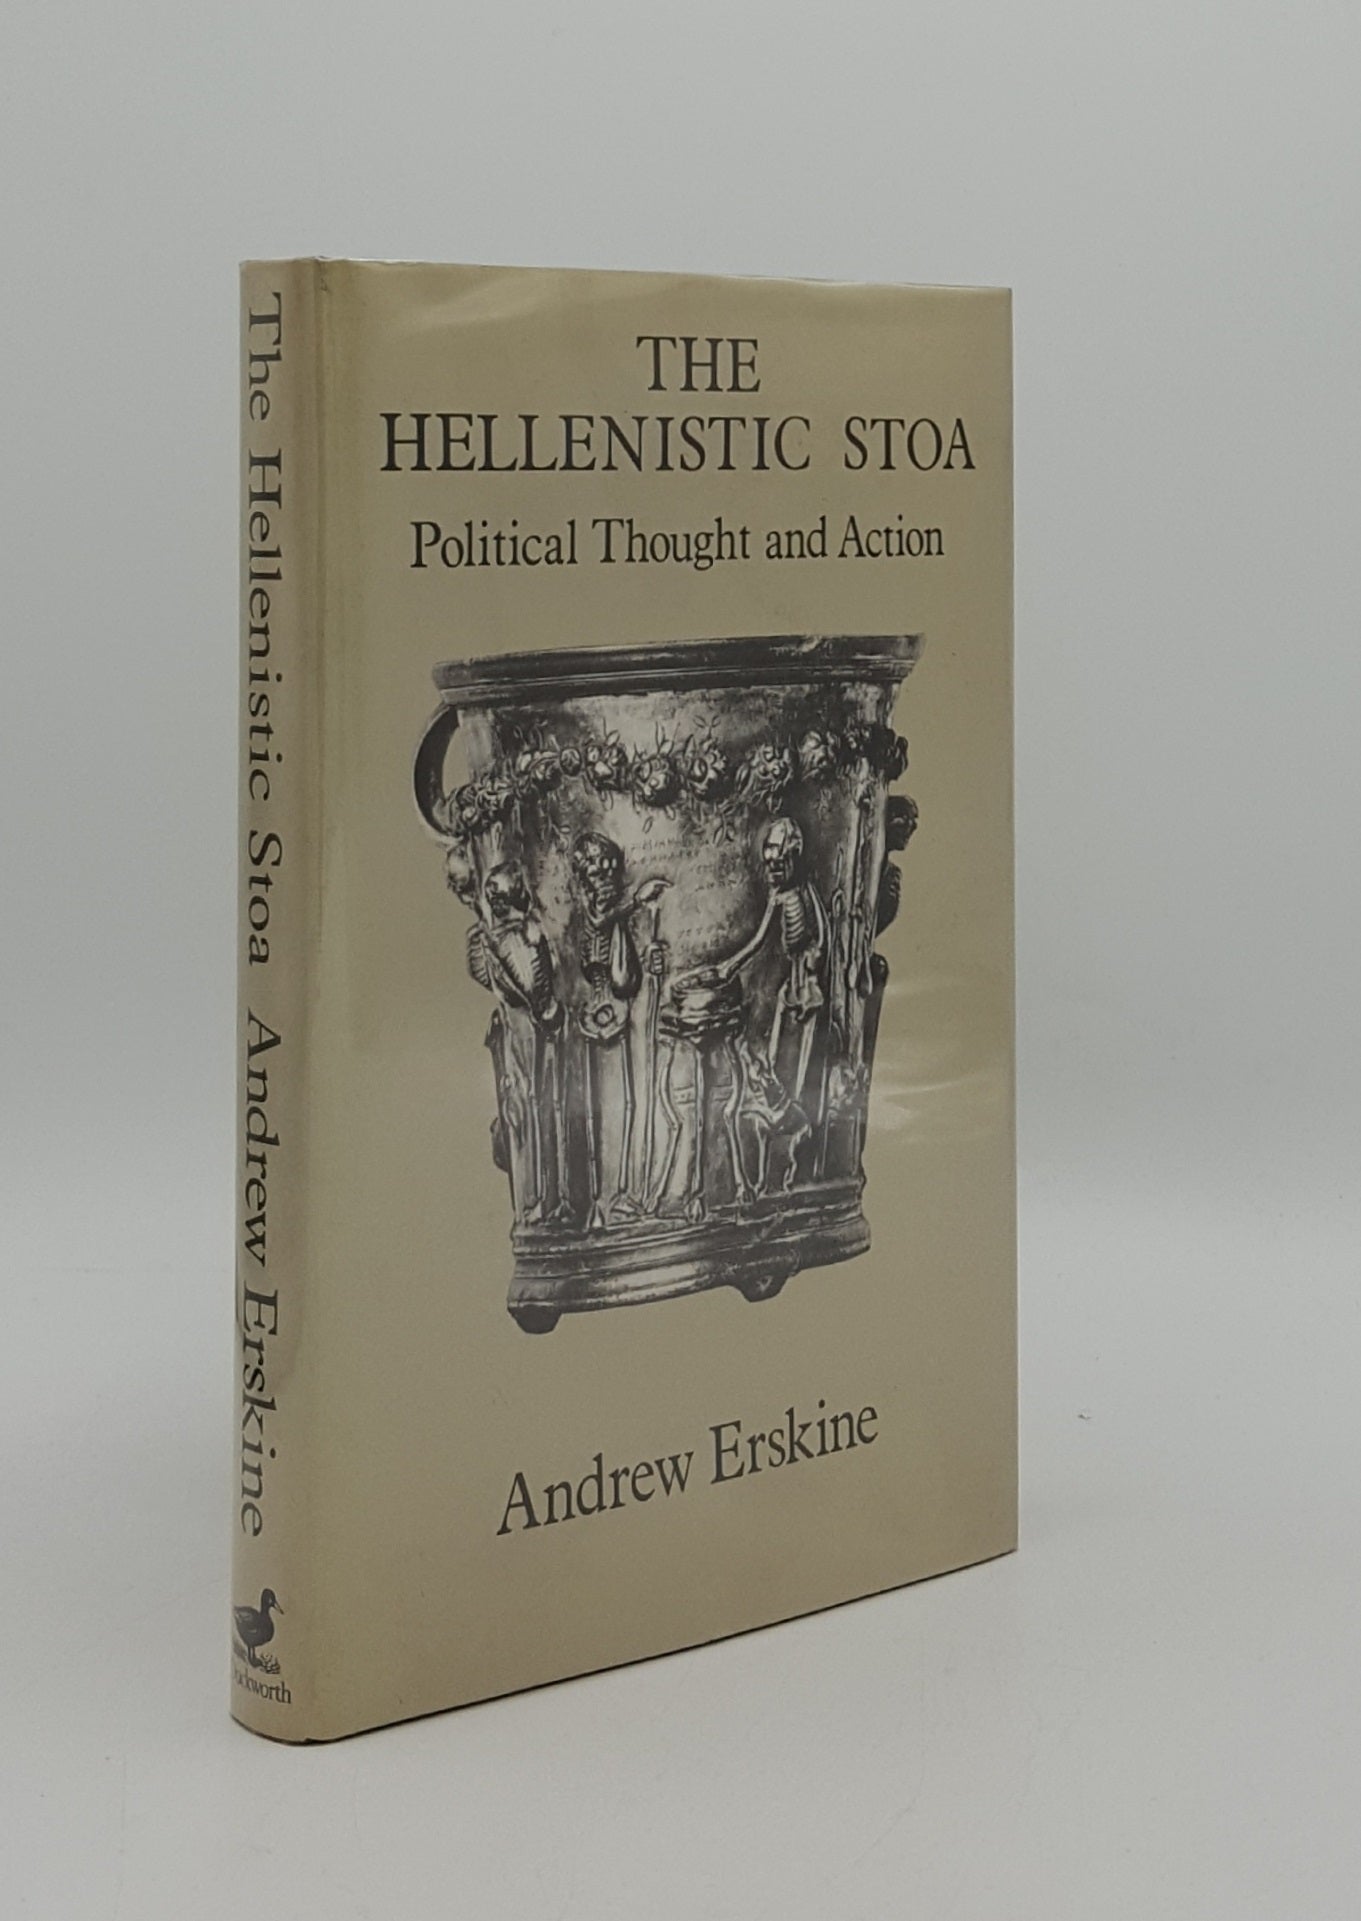 ERSKINE Andrew - The Hellenistic Stoa Political Thought and Action